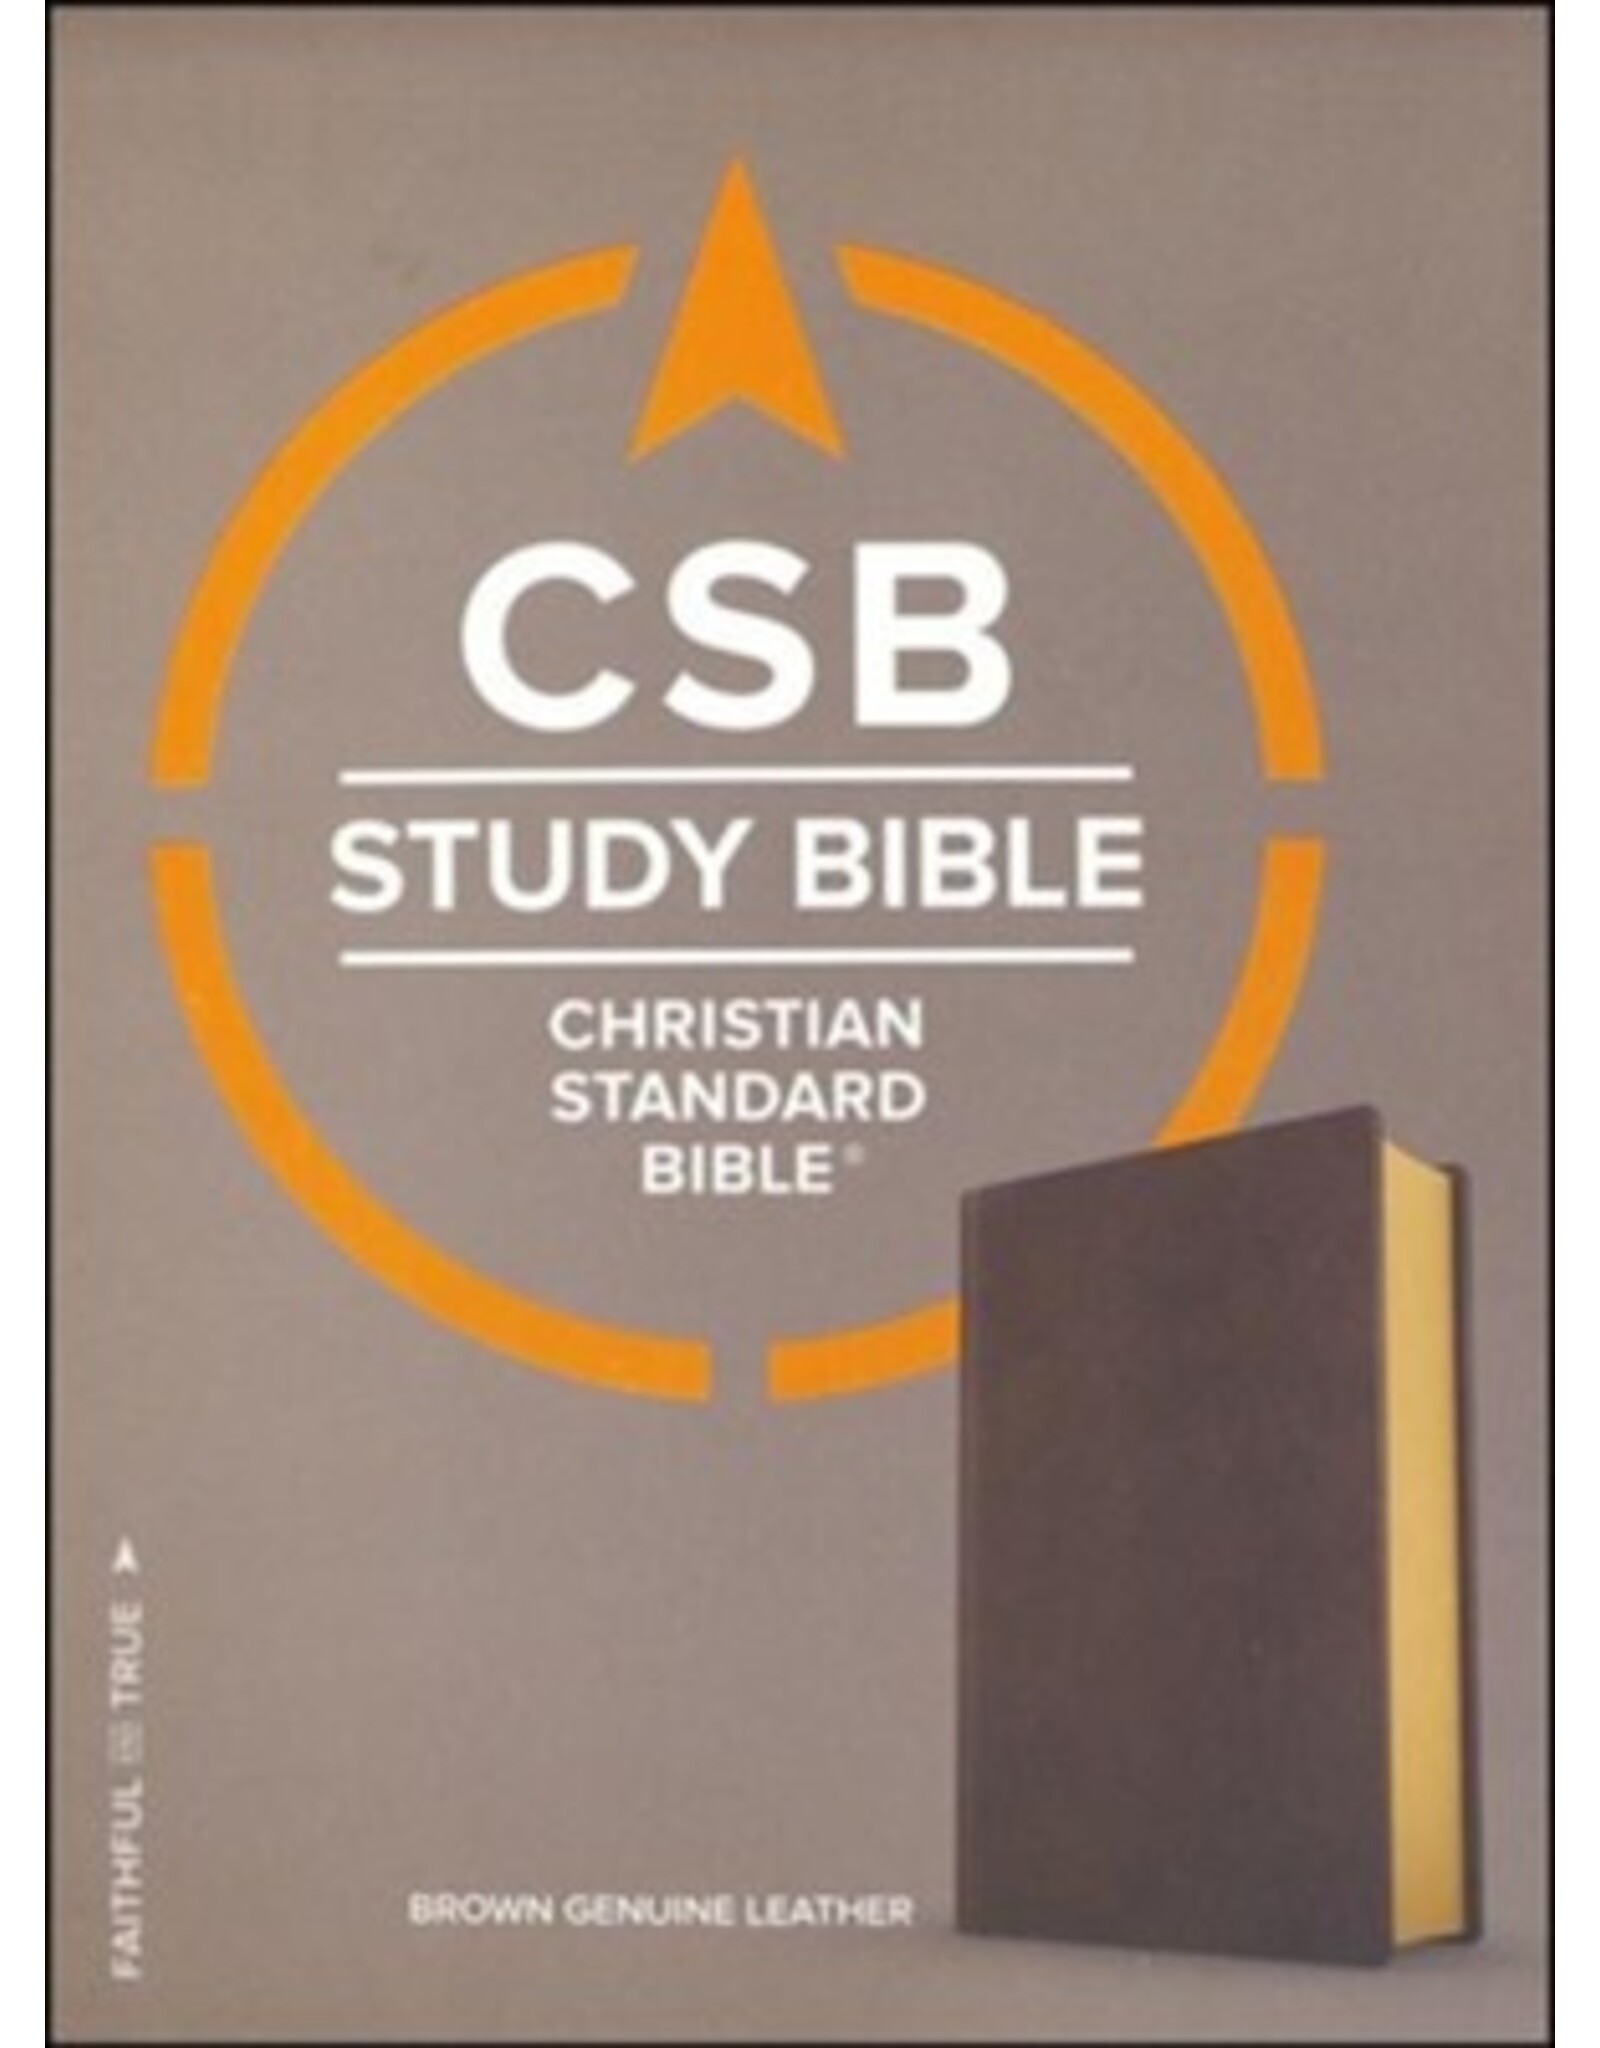 CSB Study Bible - Brown Genuine Leather